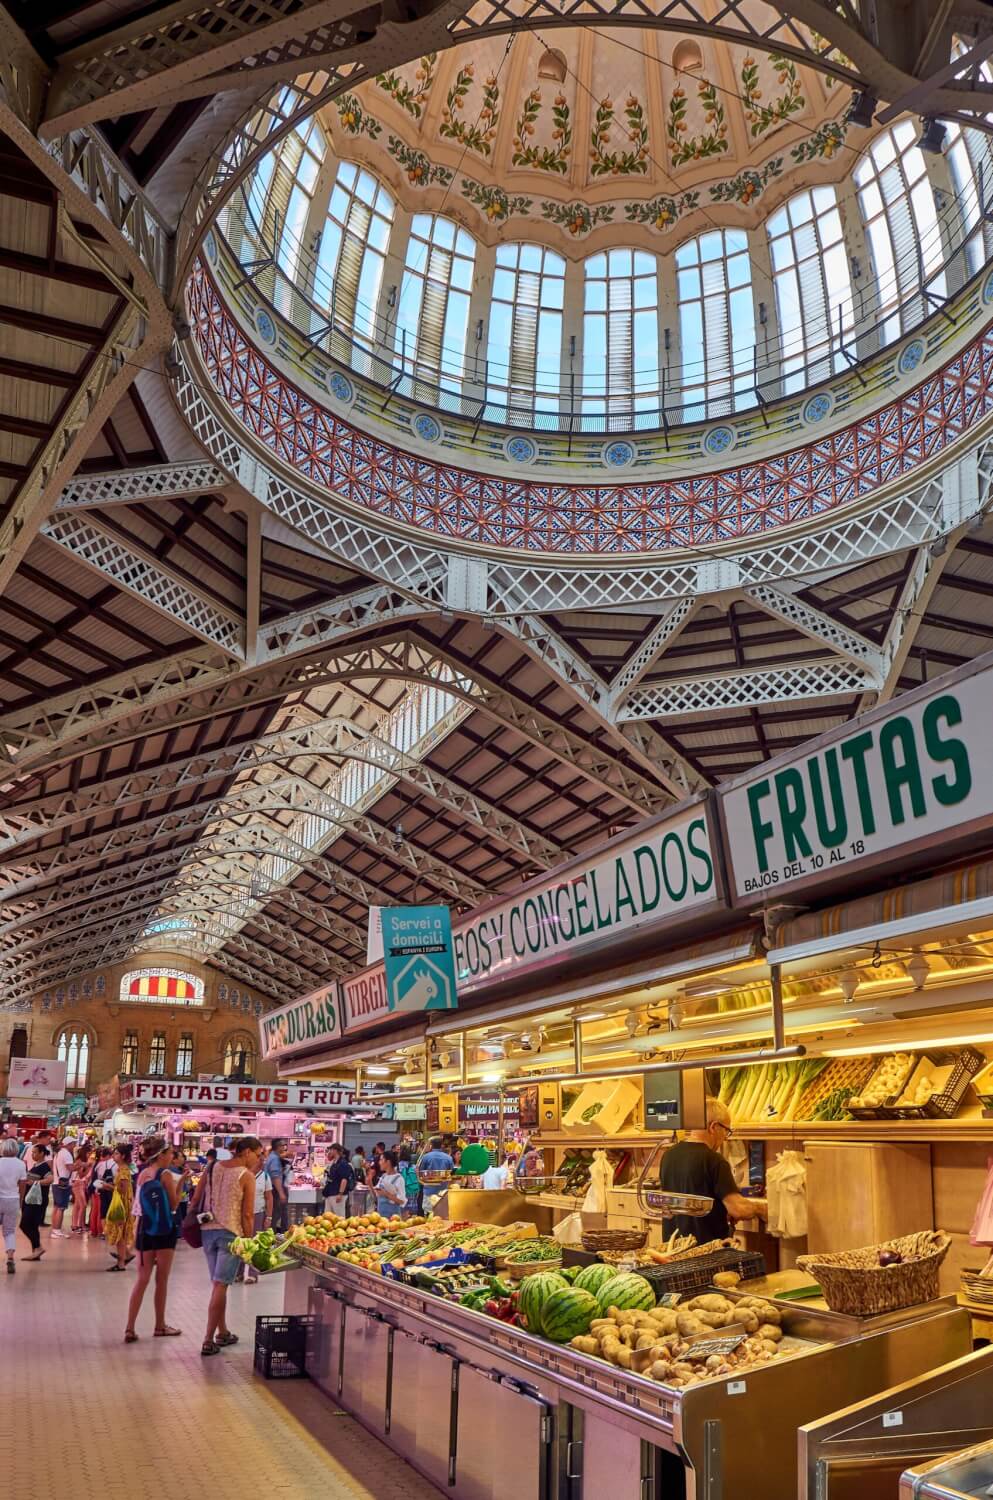 Indoor food market under a large decorative dome with stained glass windows